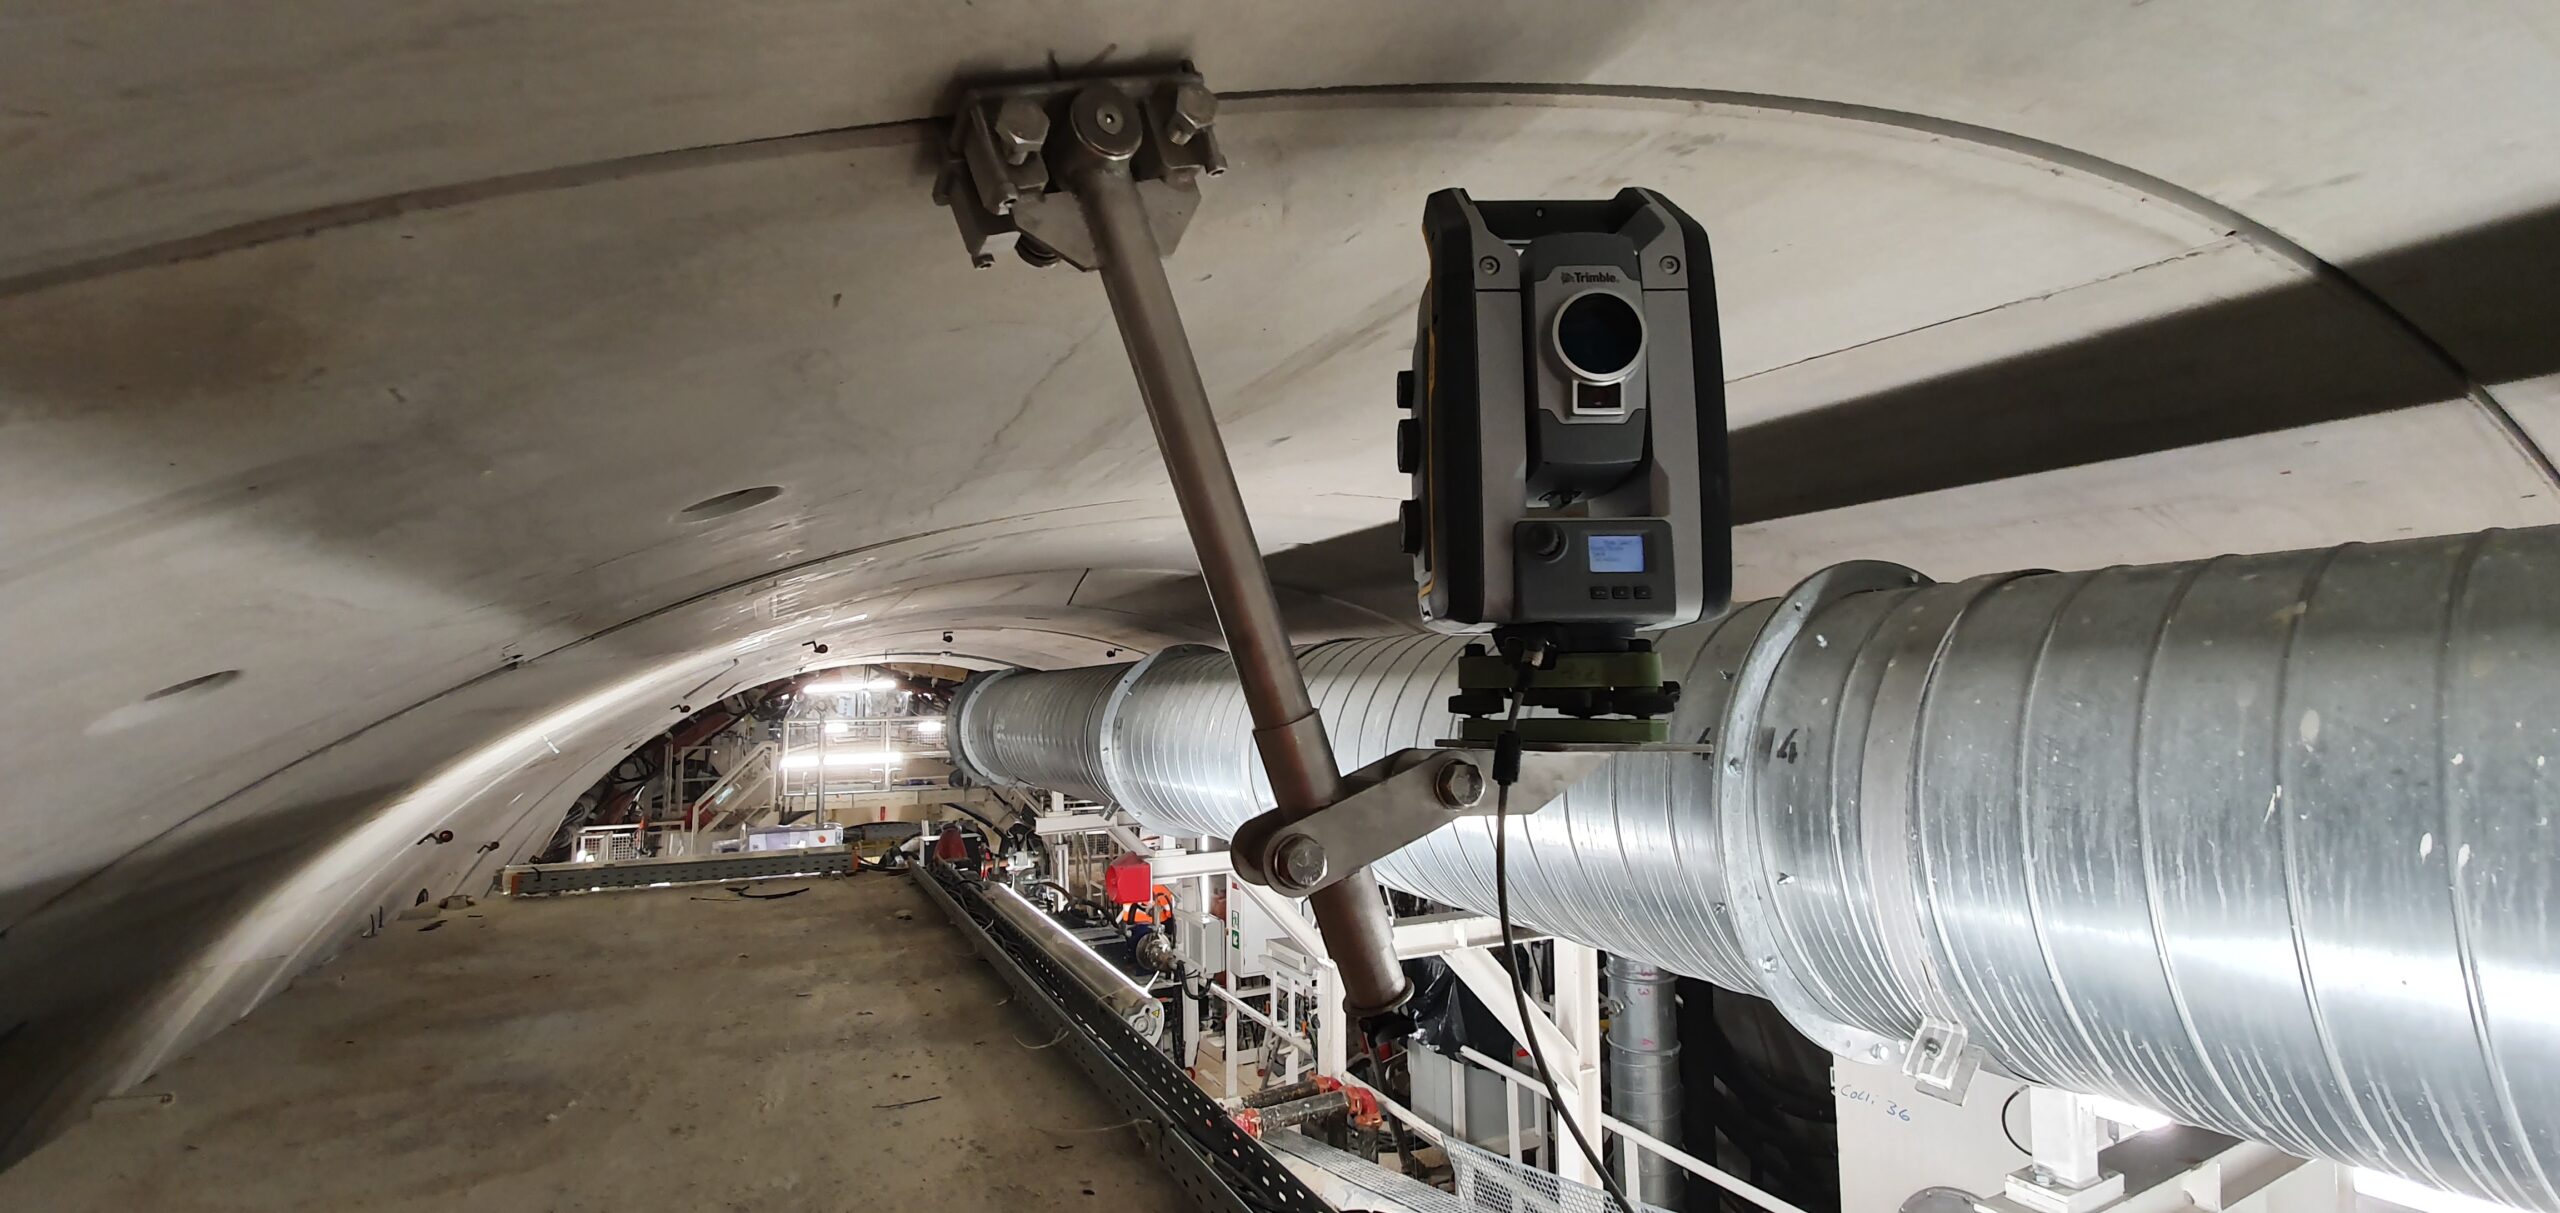 Working close behind the TBM, a total station automatically measures profiles of concrete rings lining the L14 South tunnel. Photo credit: Filipe Afonso, Eiffage GC